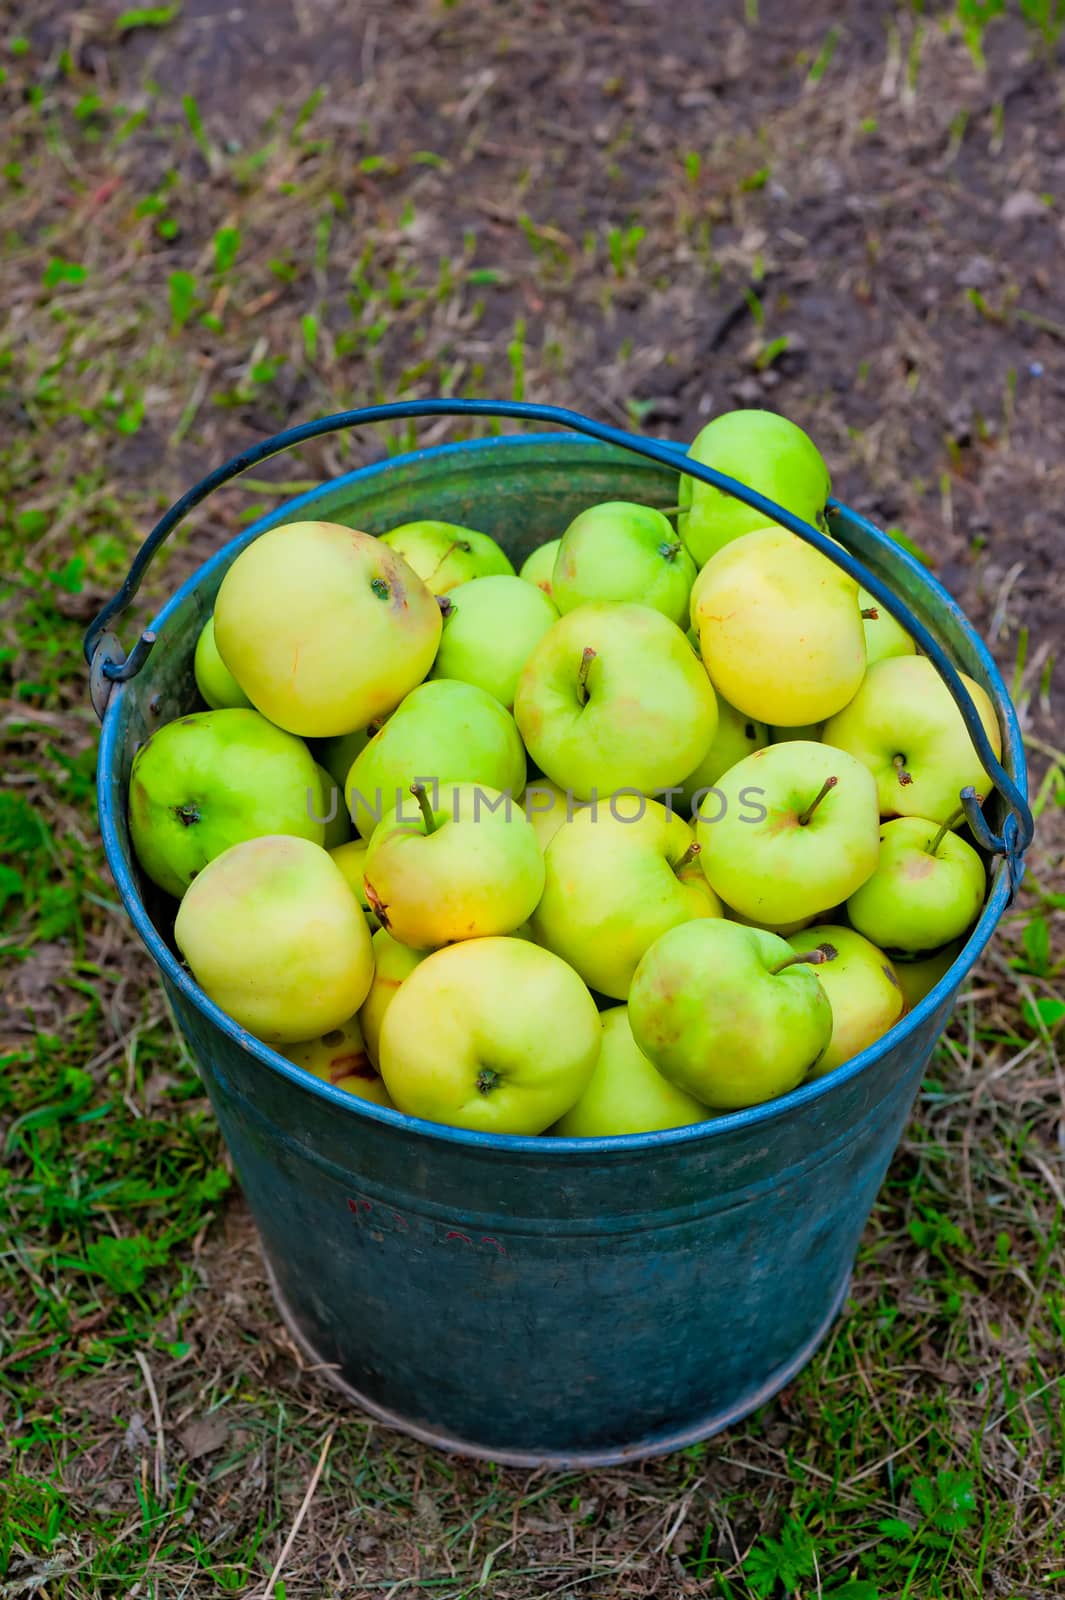 harvest of green apples in a bucket by kosmsos111